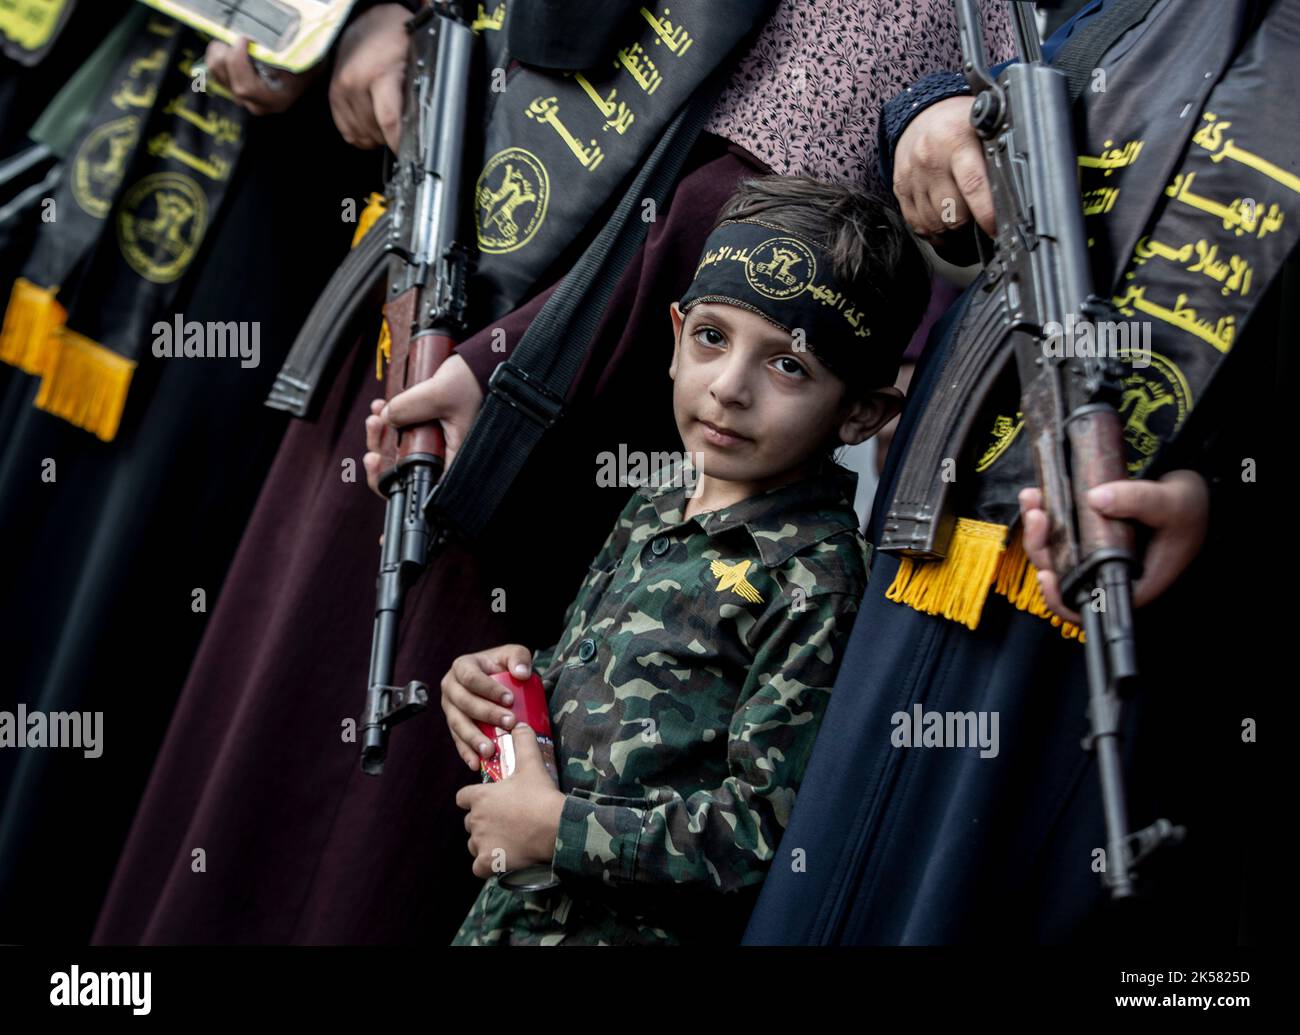 Palestinian Territories, Gaza Strip. October 06th 2022. Armed fighters from Al-Quds Brigades, the military wing of Islamic Jihad, participate in an anti-Israel military parade on the 35th anniversary of the launch of the Islamic Jihad movement in Khan Yunis, southern Gaza. Stock Photo